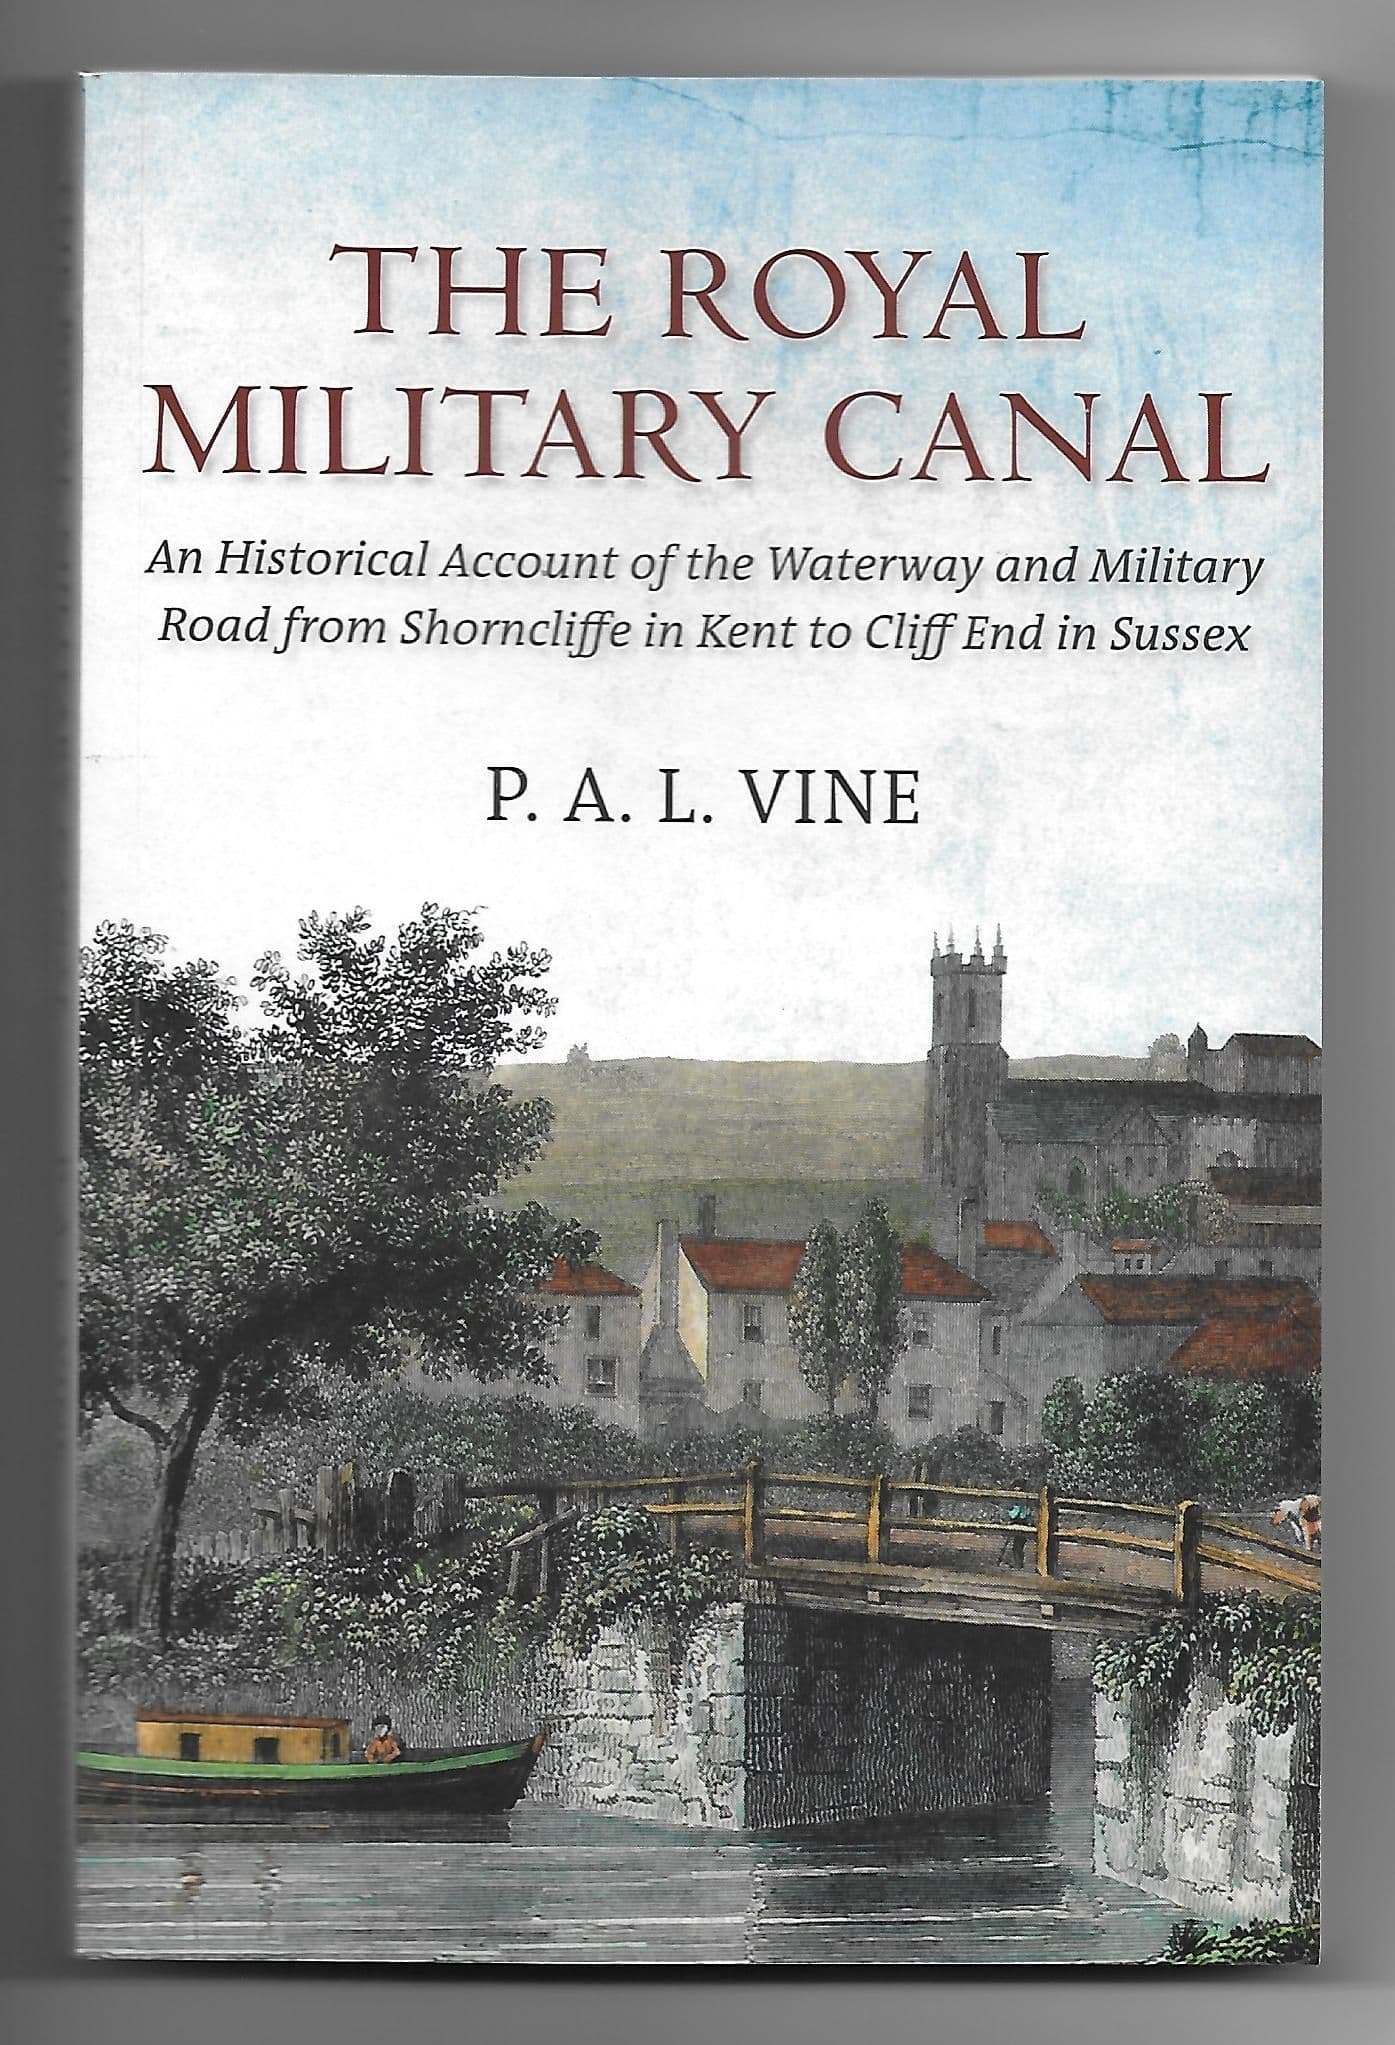 The Royal Military Canal